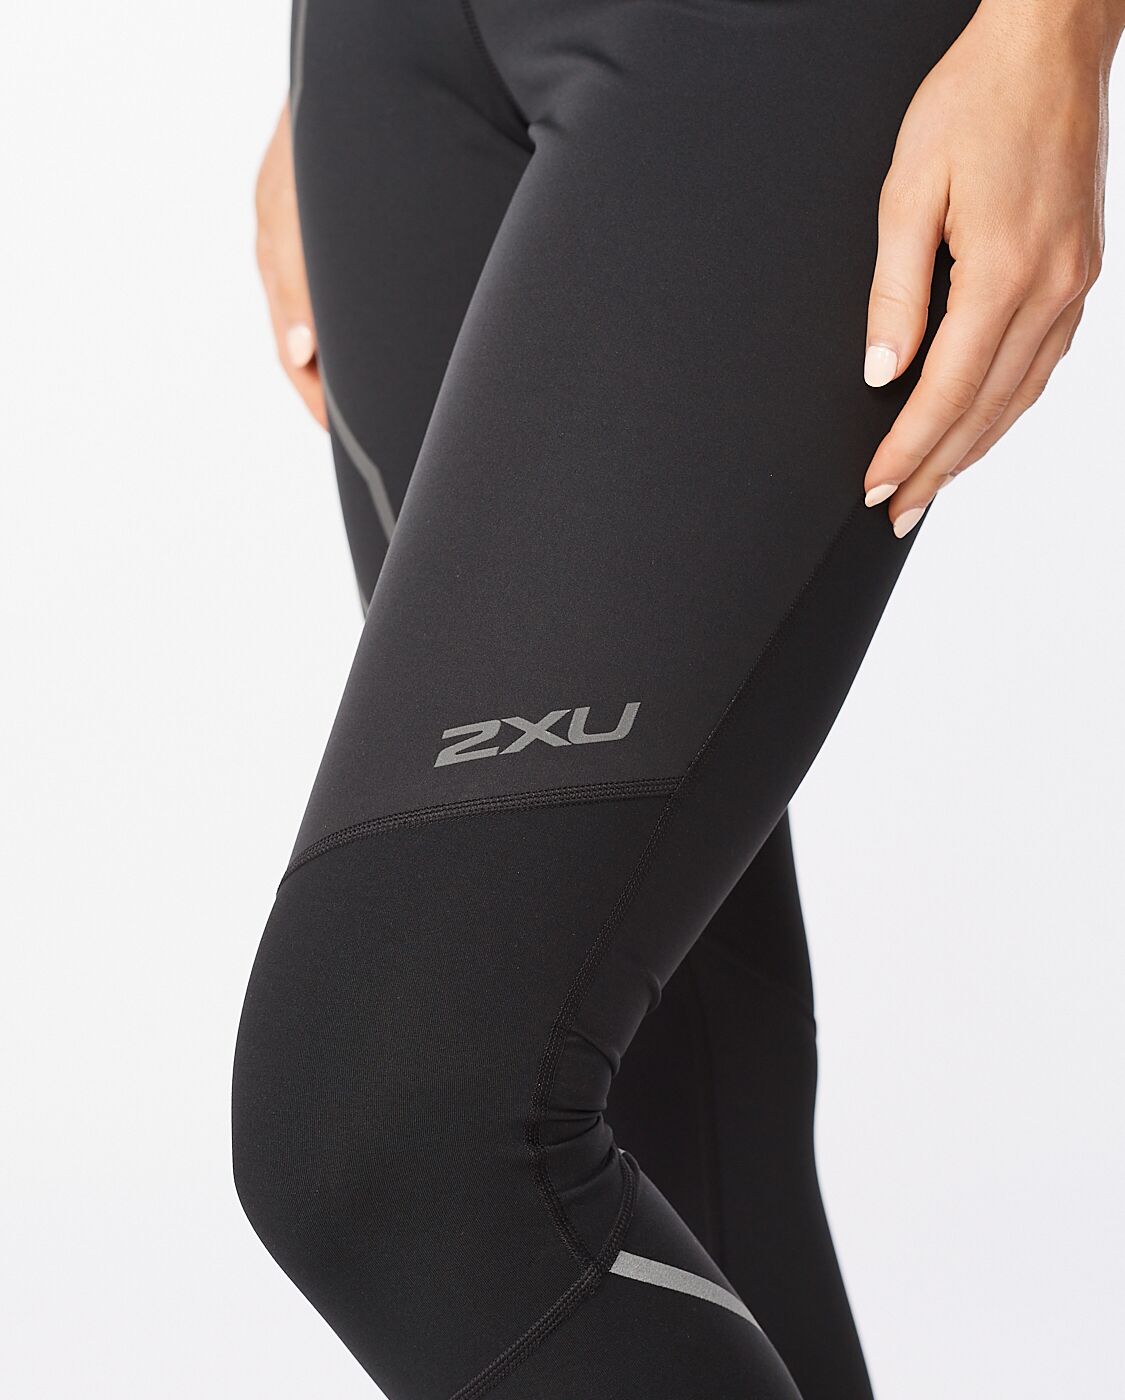 2XU South Africa - Womens Ignition Shield Compression Tights - Black/Black Reflective